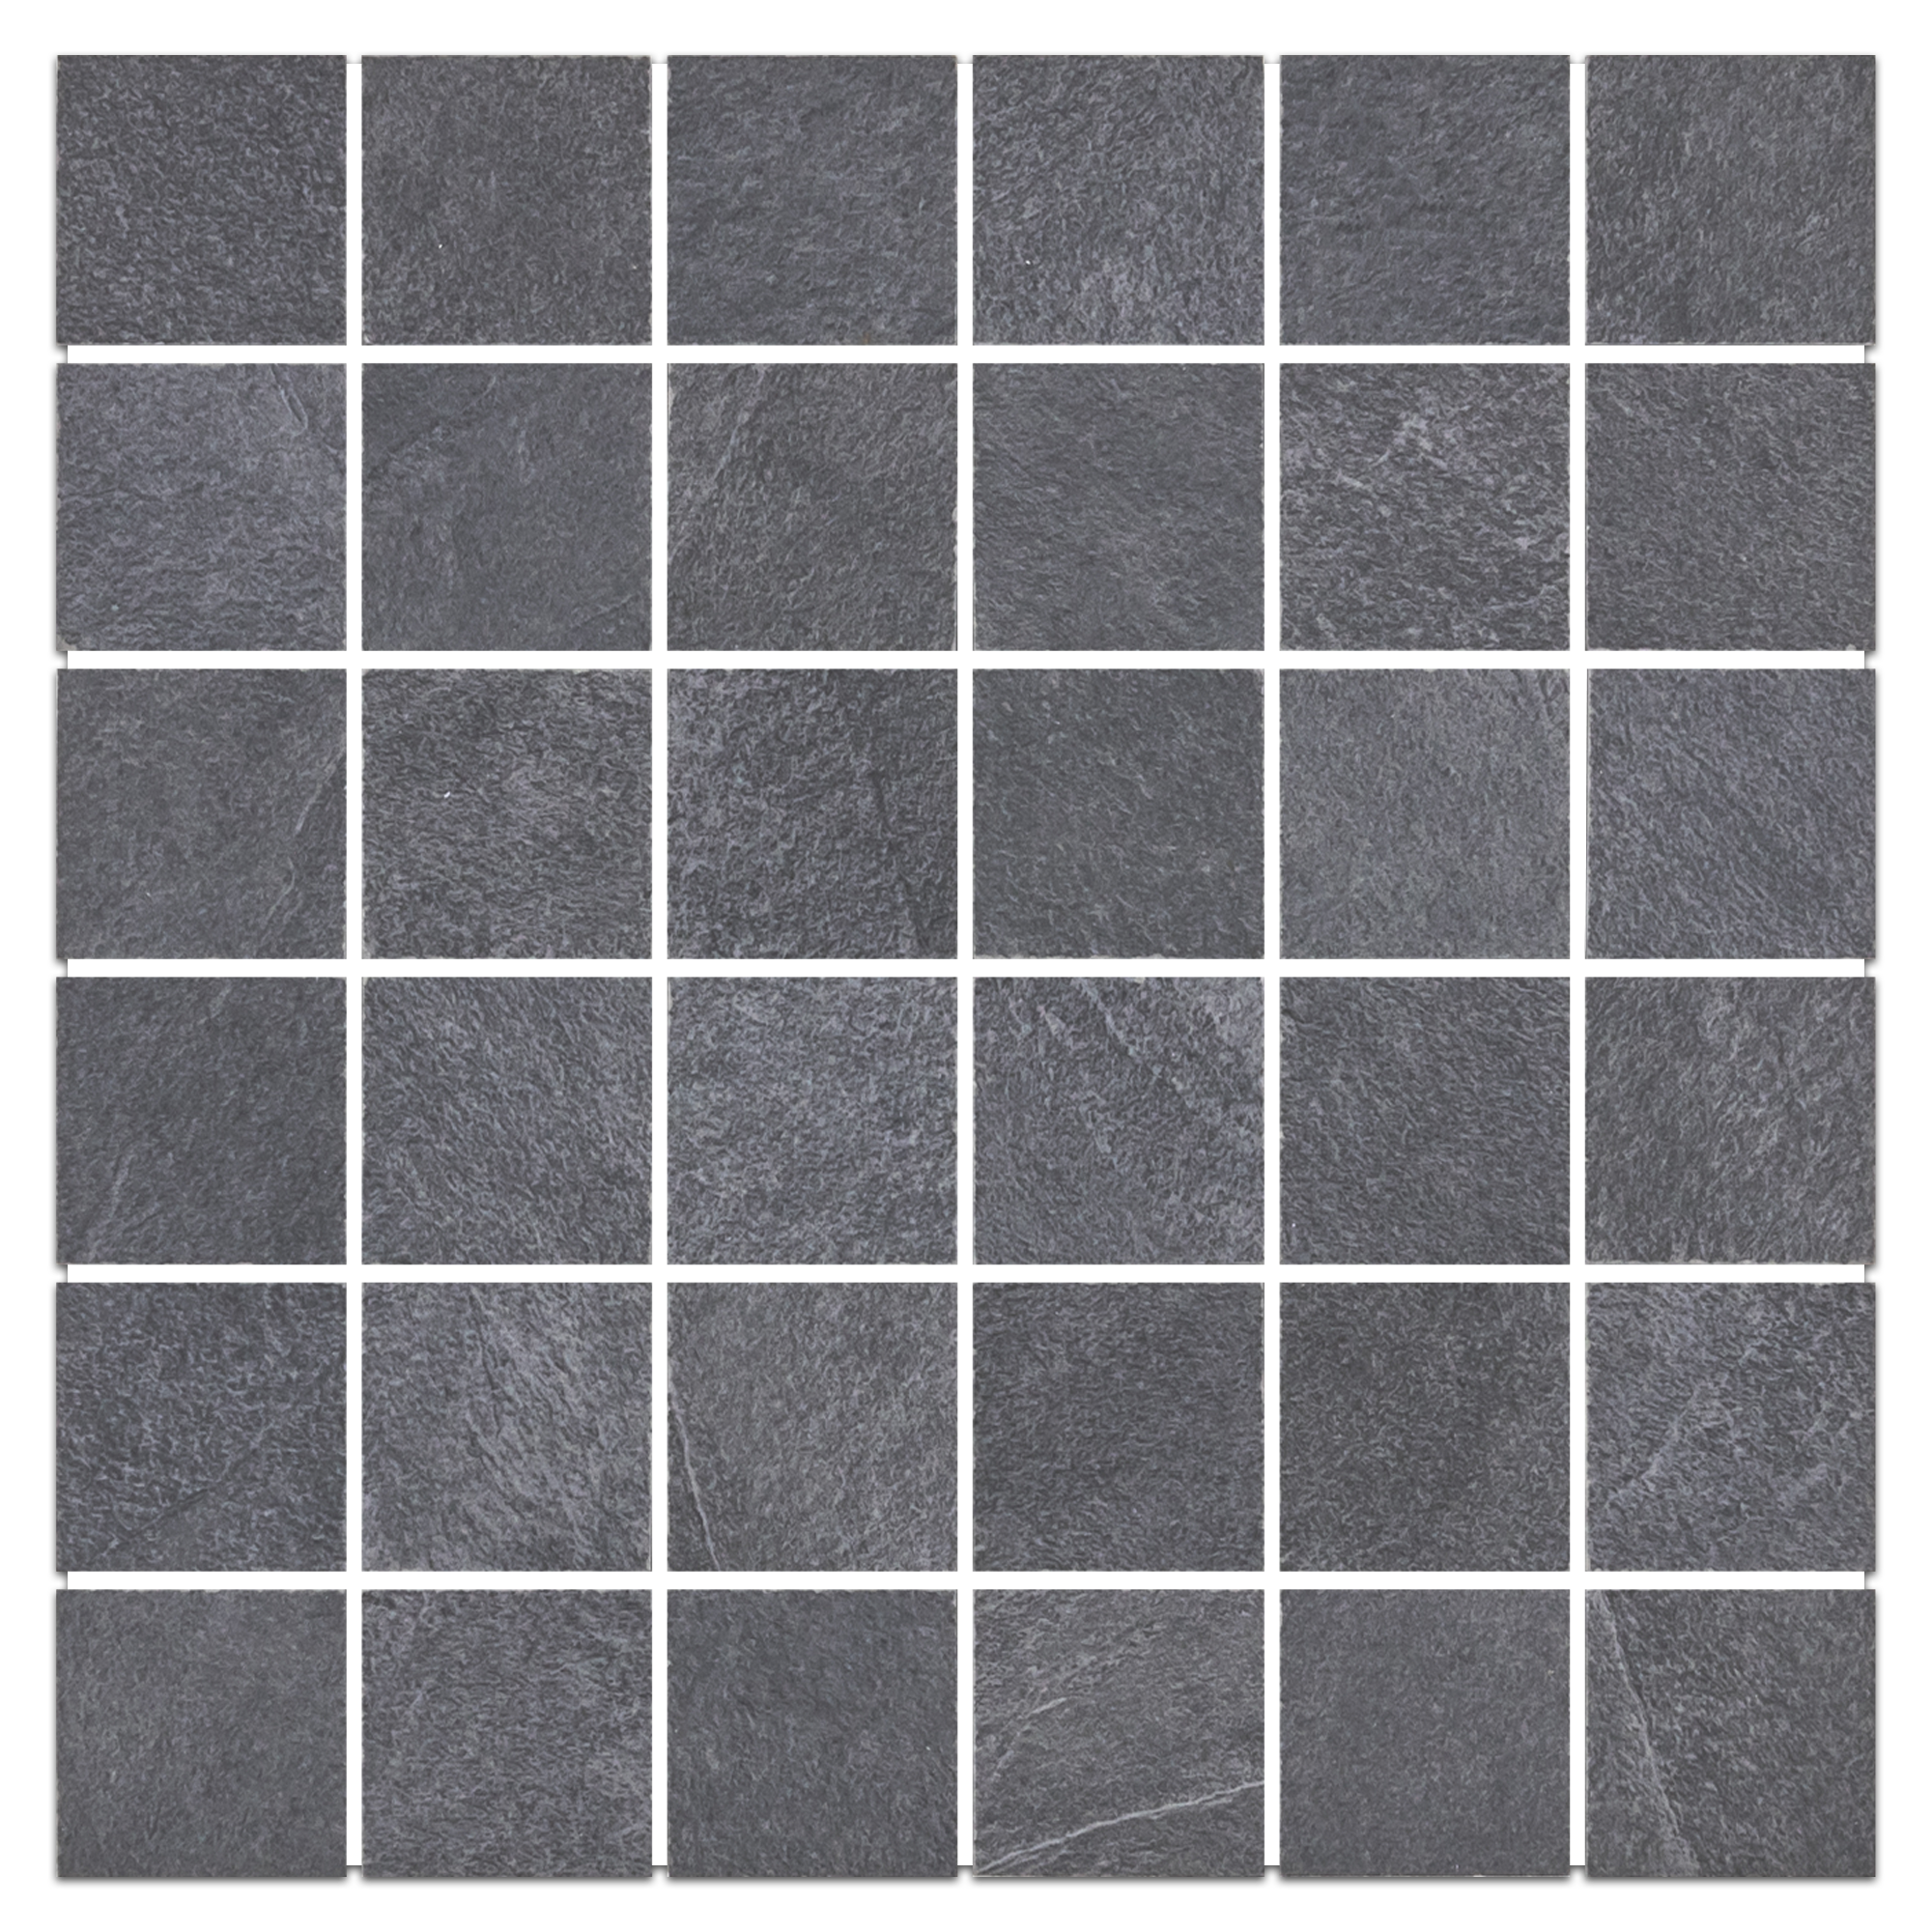 Elon Ecostone Coal Porcelain 2x2 Straight Stack Field Mosaic 12x12x9mm Natural SP104 Surface Group International Product